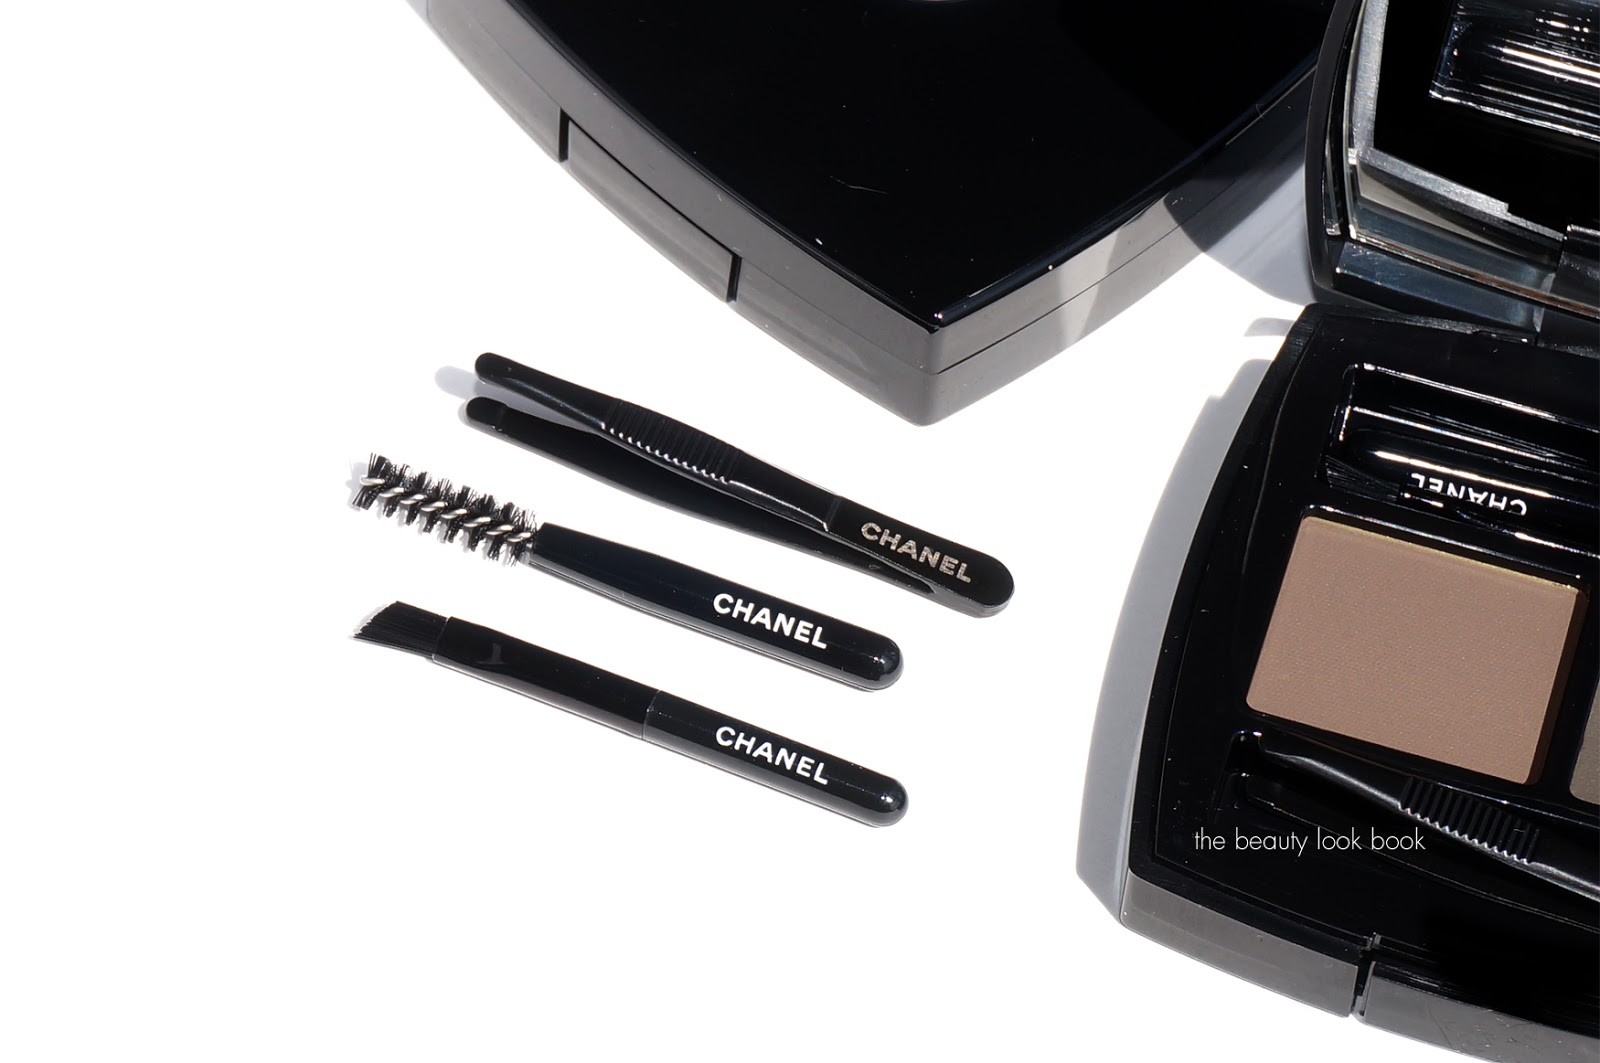 THE EXCLUSIVE BEAUTY DIARY : CHANEL LA PALETTE SOURCILS – BROW POWDER DUO &  STYLO SOURCILS WATERPROOF DEFINING EYEBROW PENCIL